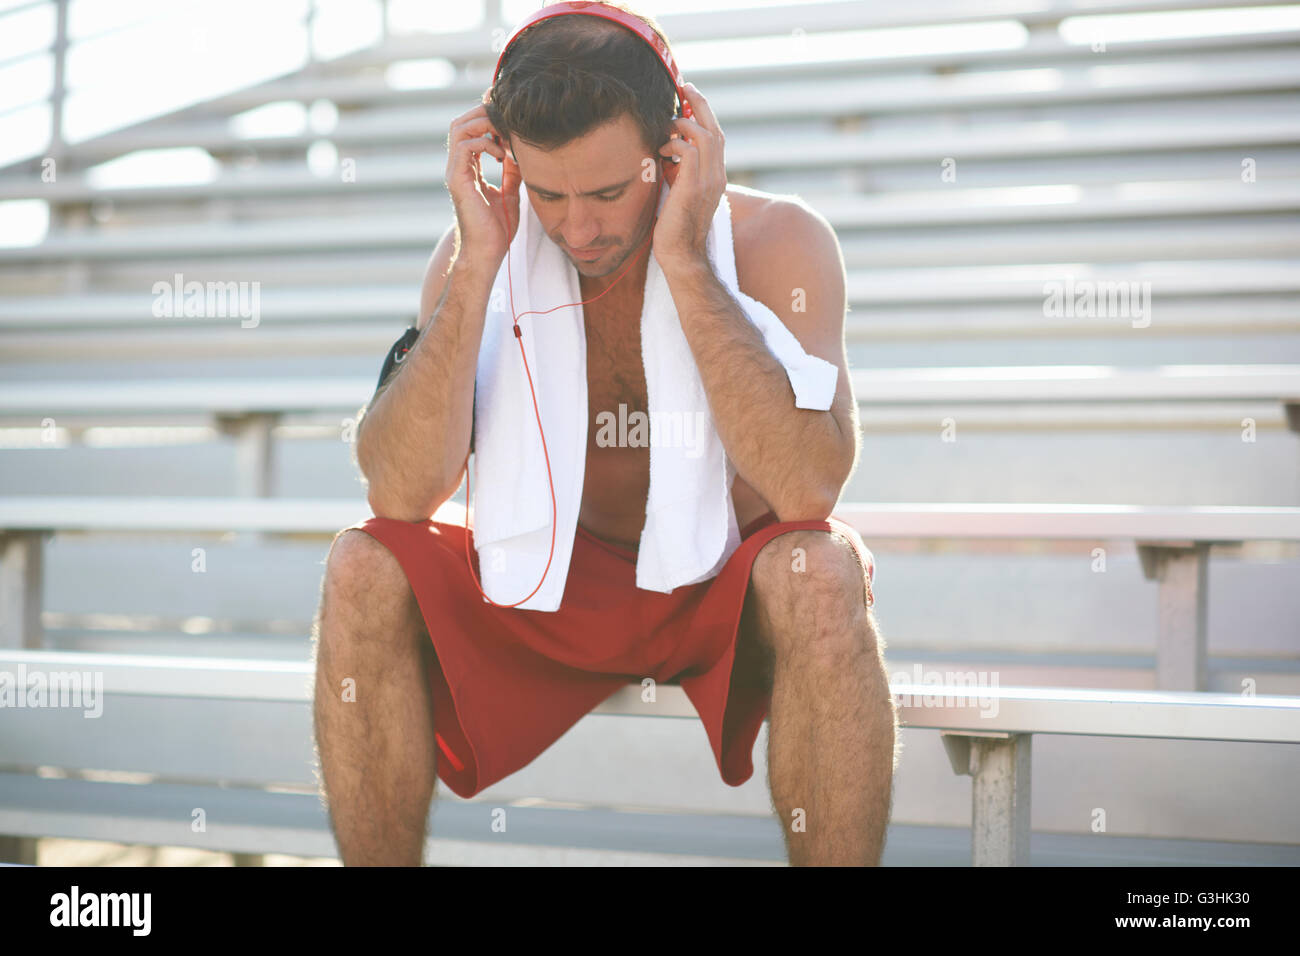 Mid adult man sitting on bench, taking a break from exercise, wearing headphones, towel around neck Stock Photo